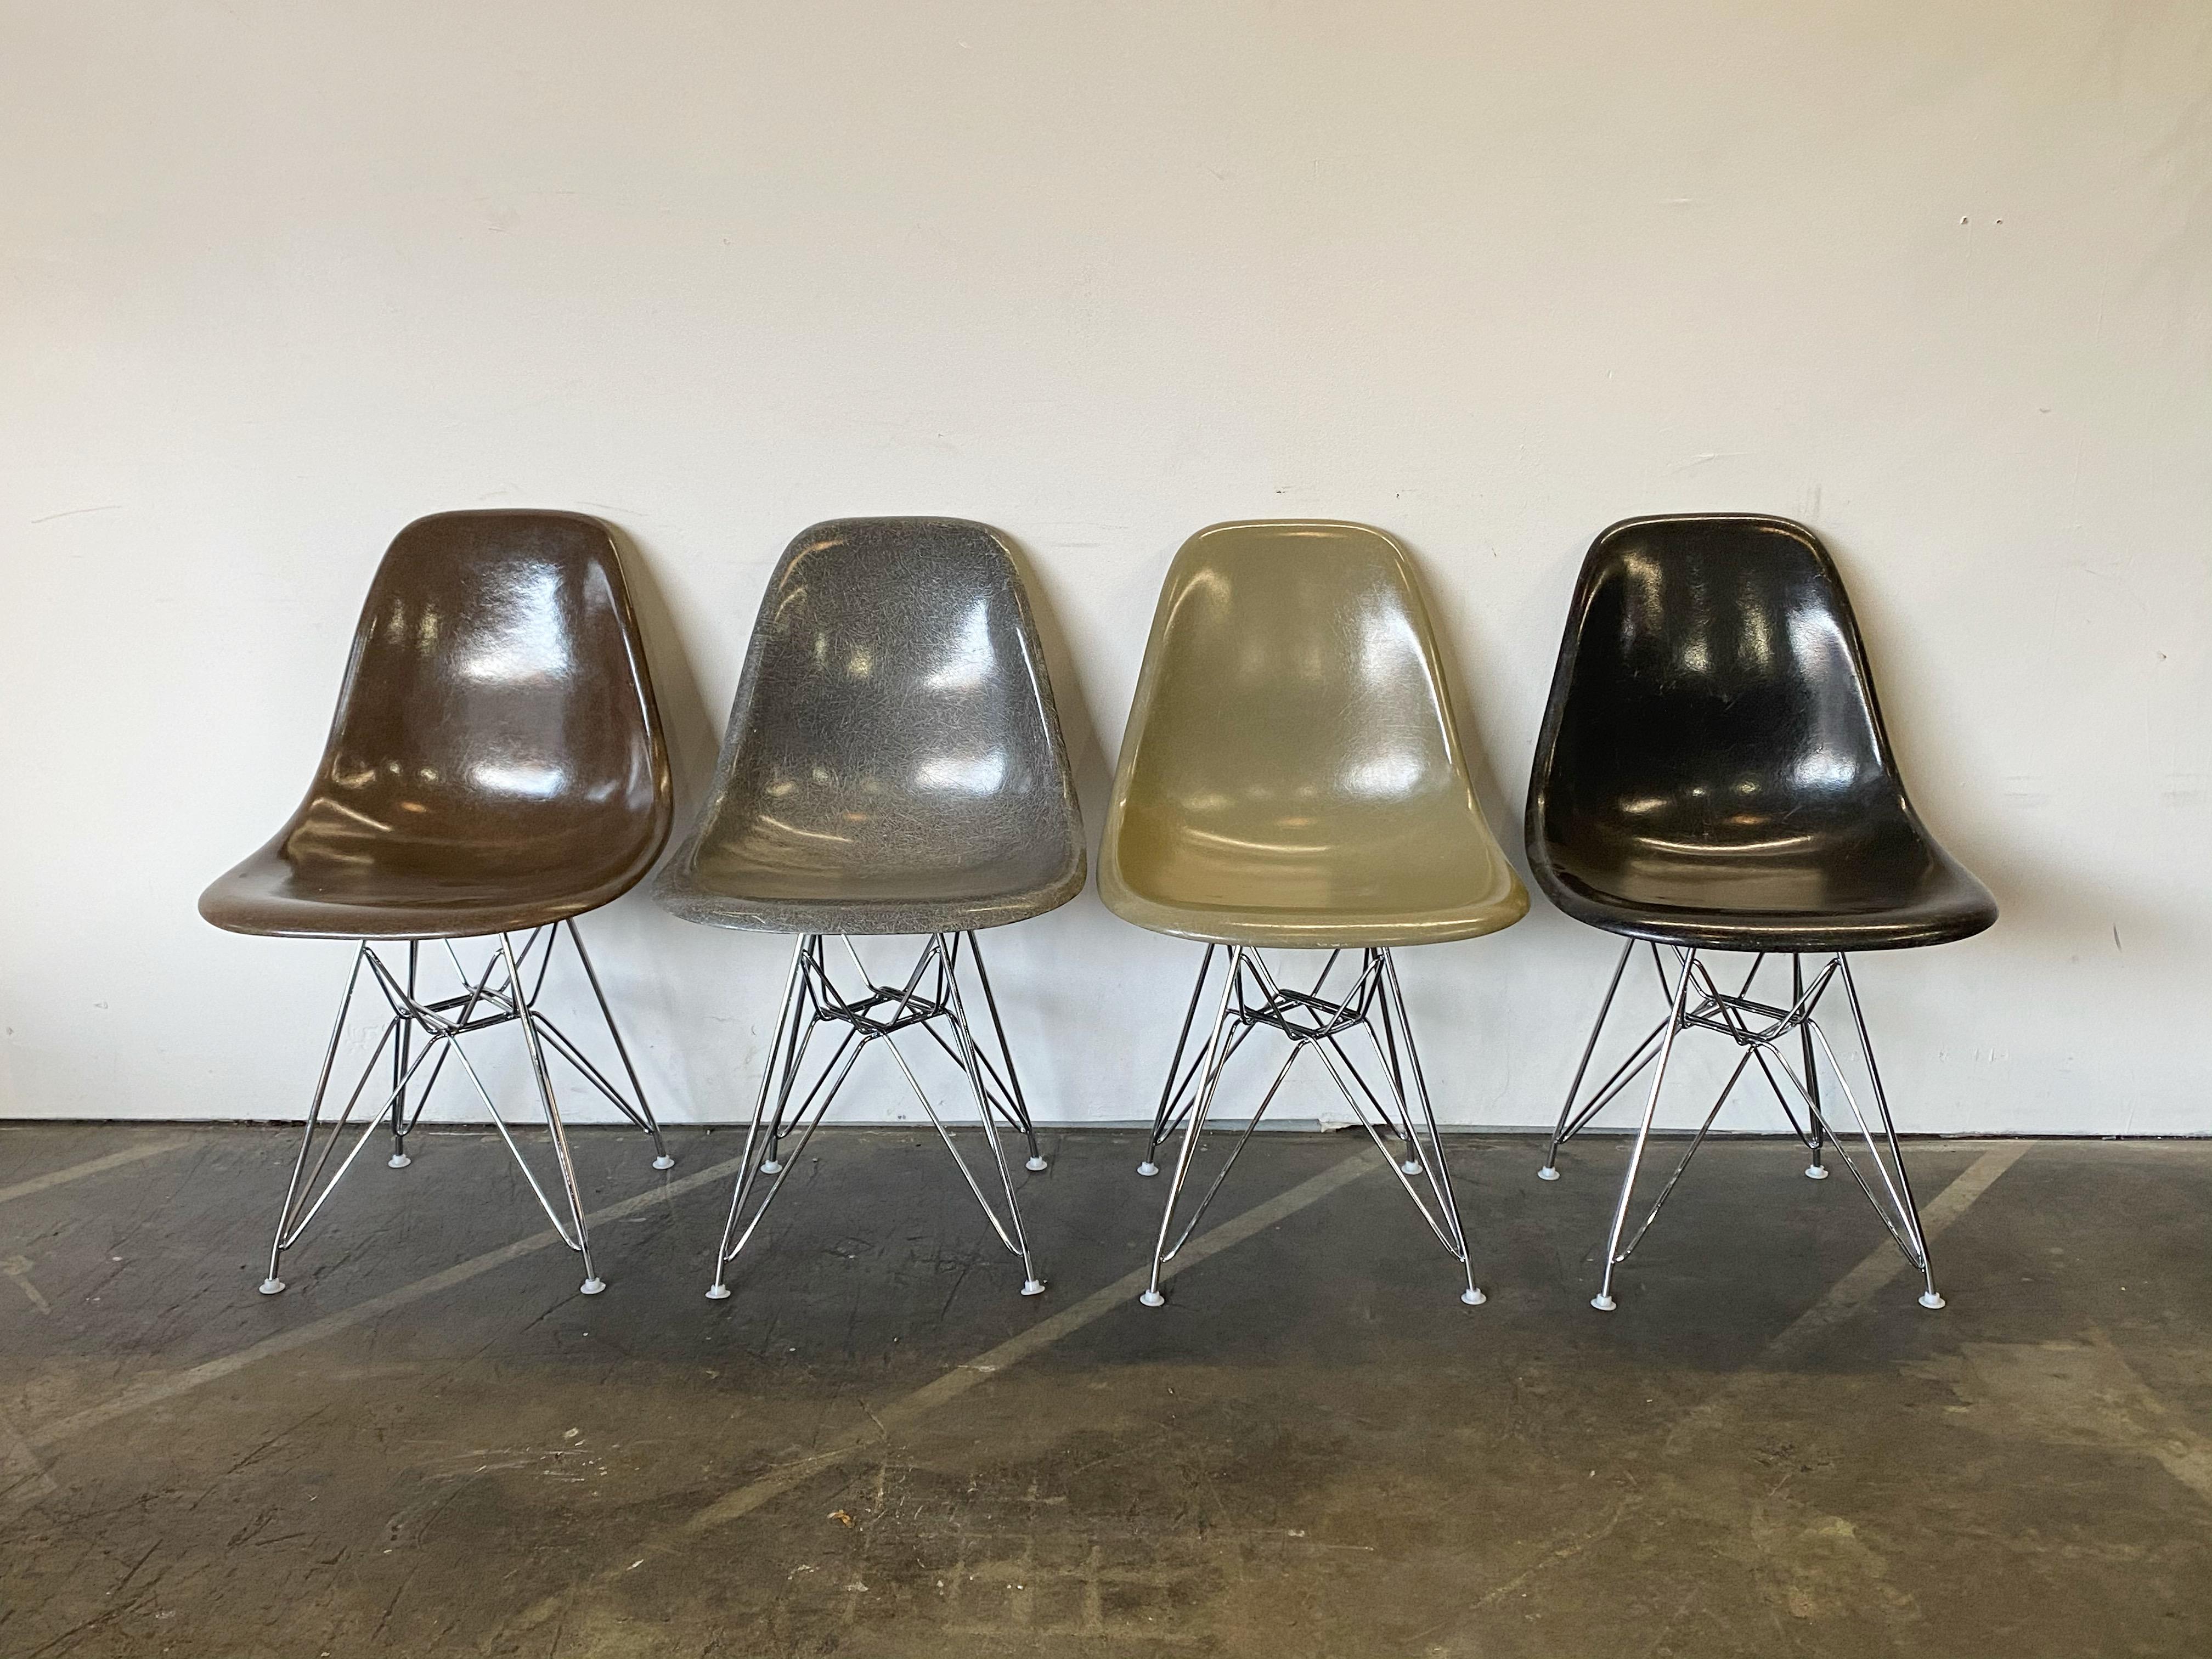 Gorgeous and unique arrangement of vintage Herman Miller Eames fiberglass shell chairs. In very good condition with even color and pronounced fiberglass strands for attractive textured appearance. Outfitted with new chrome Eiffel bases with